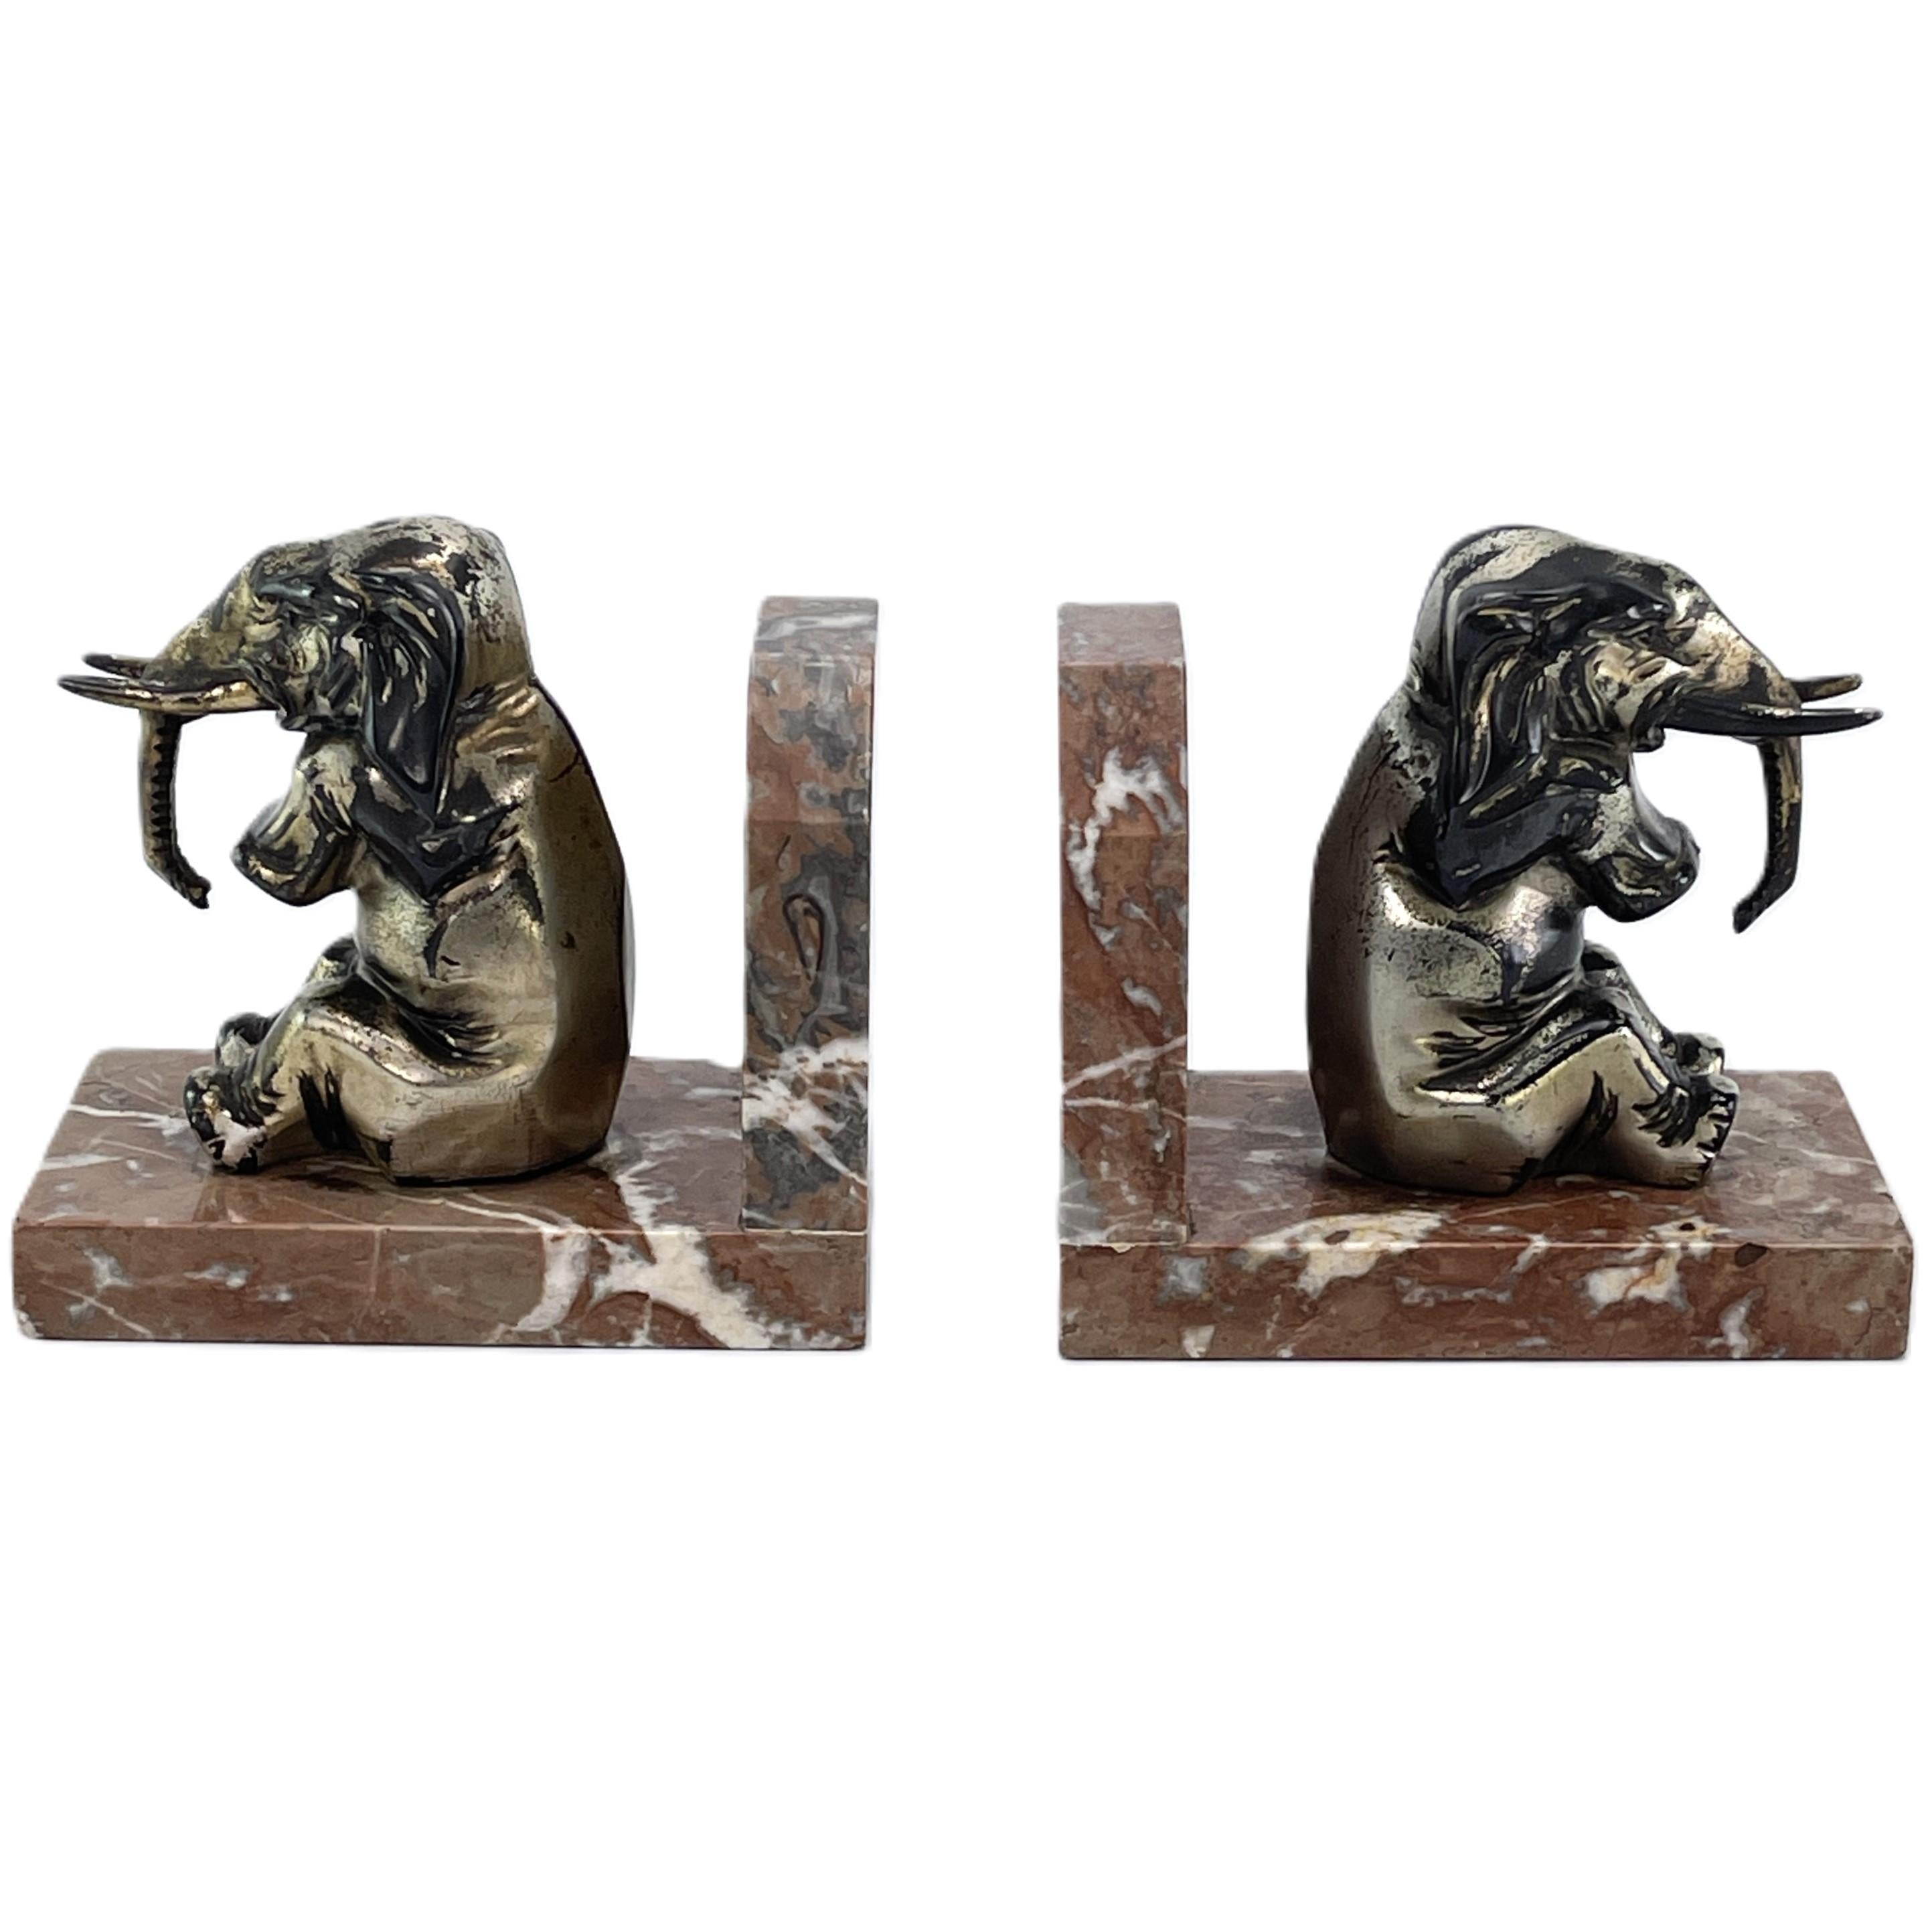 Set out of 2  Art Deco Bookends with Elephants, 1930s